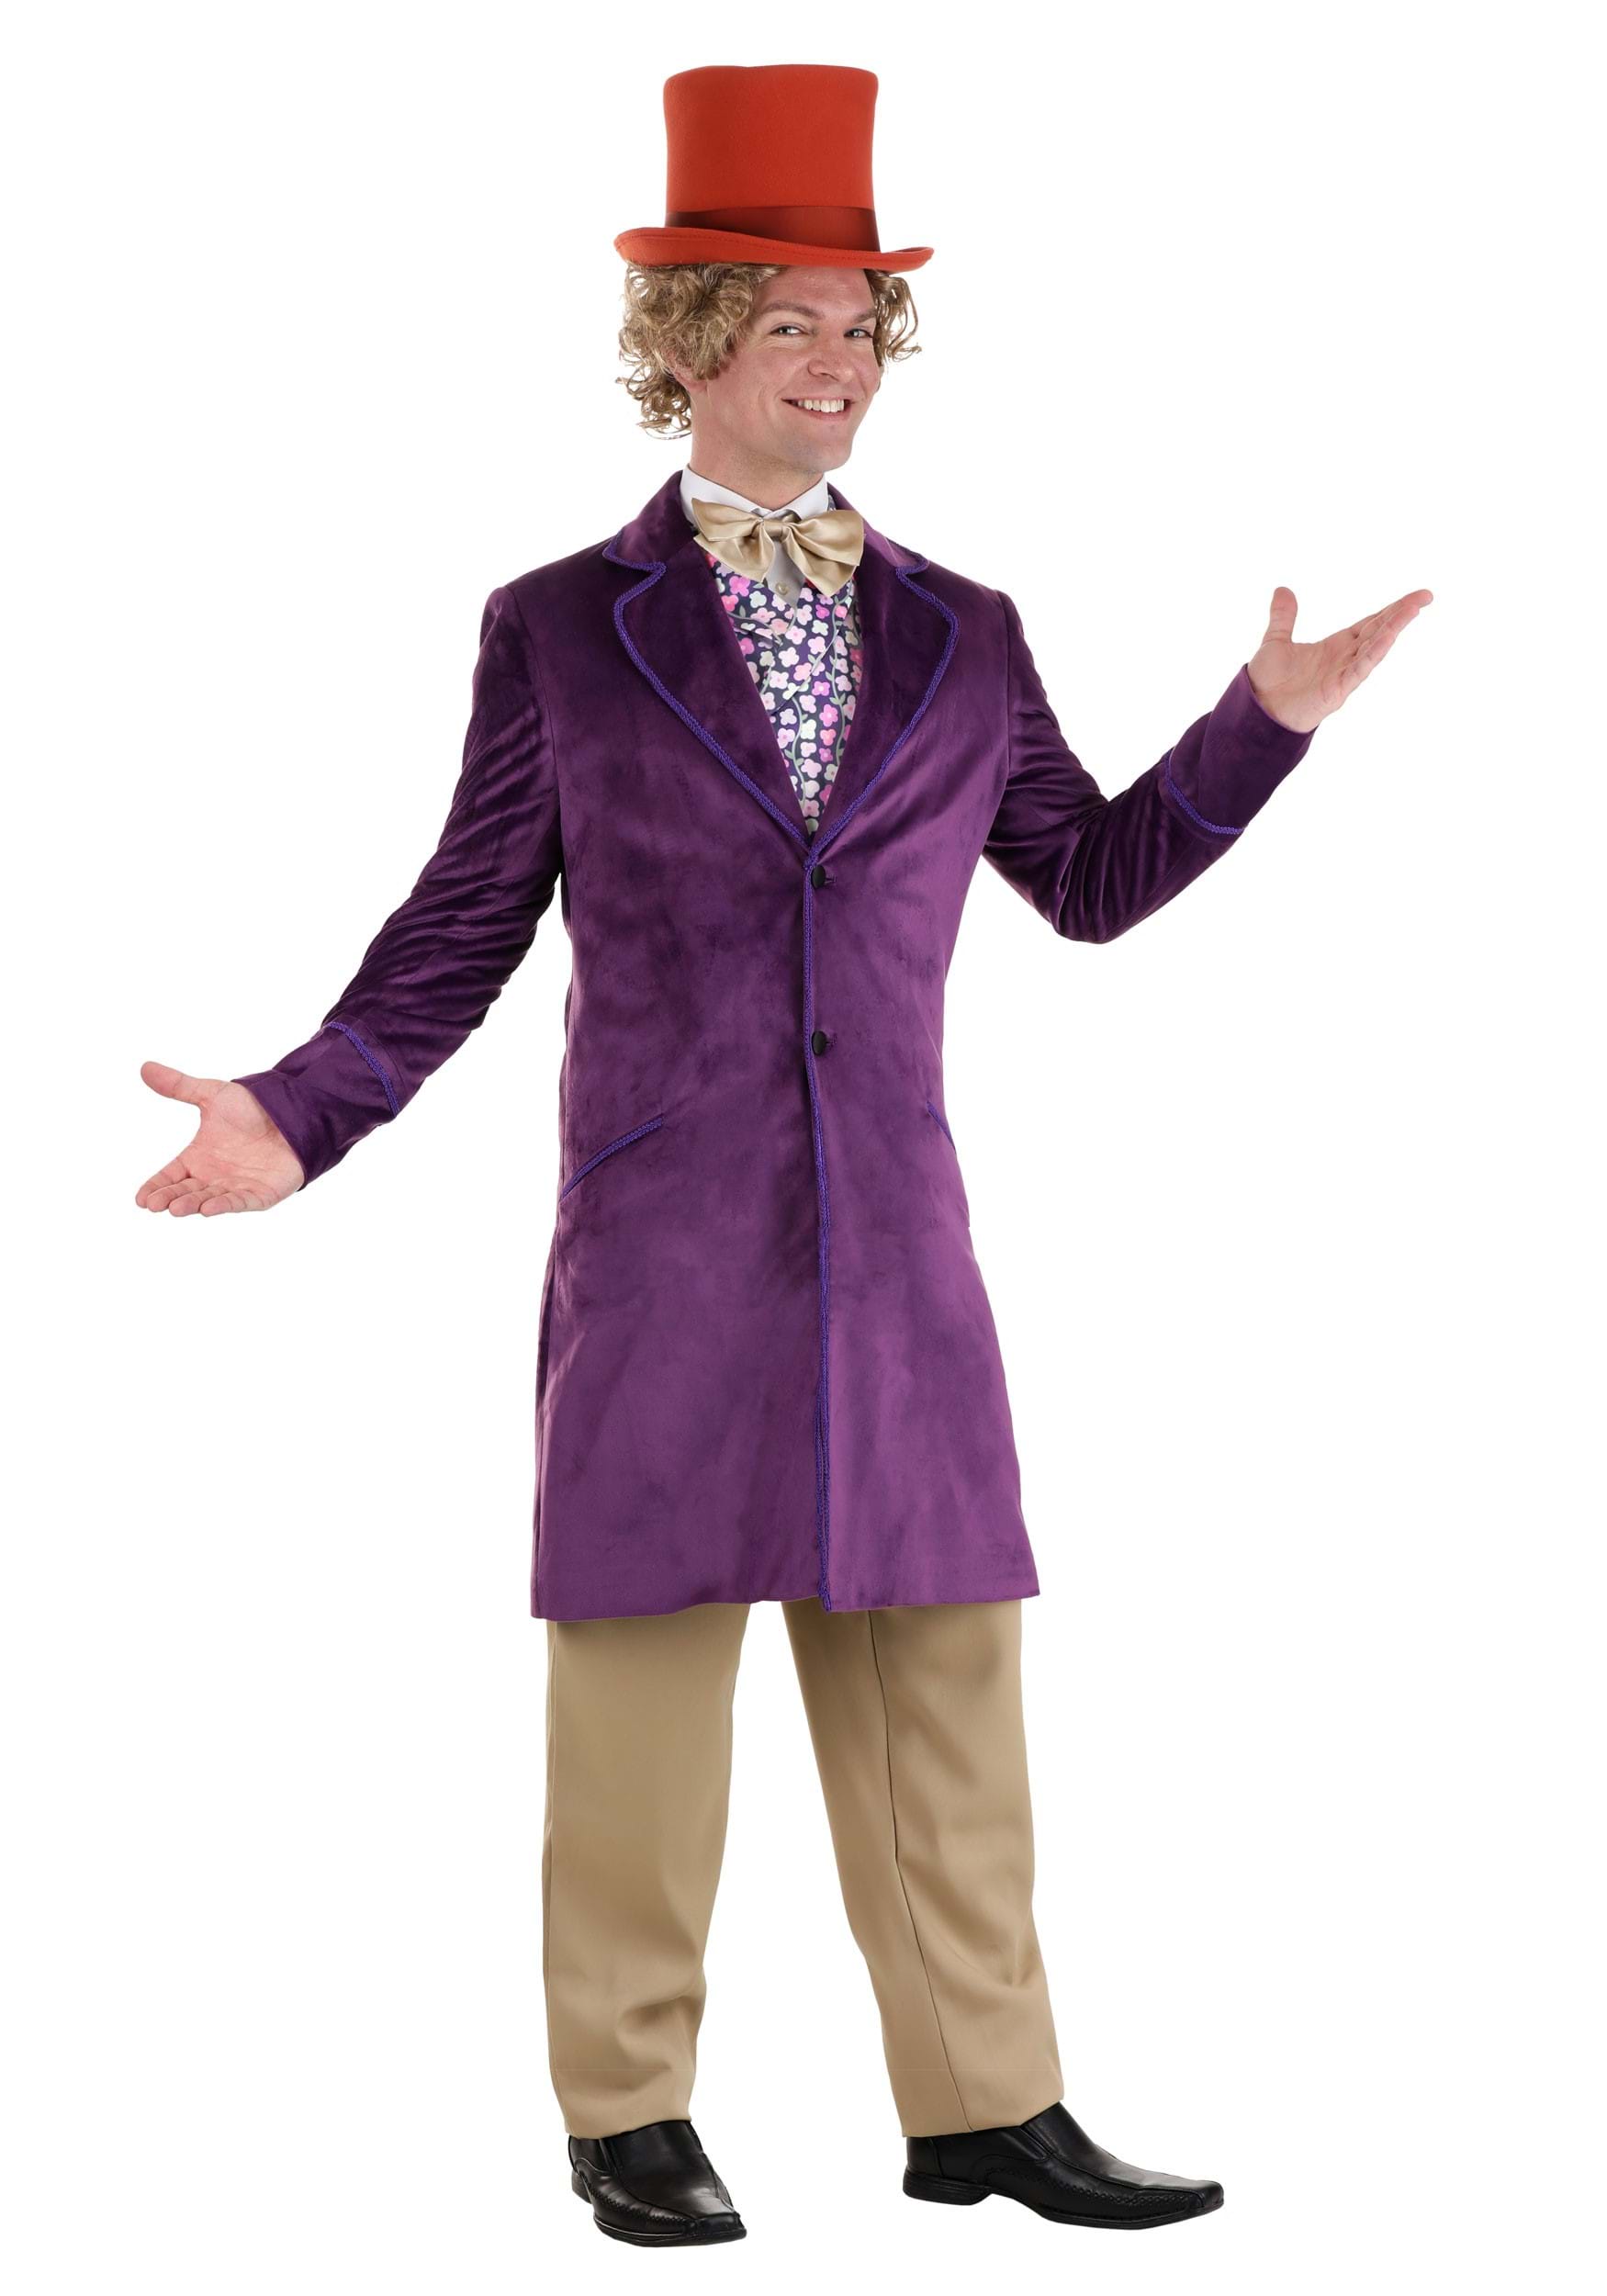 Authentic Willy Wonka Costume Jacket for Men | Willy Wonka Costumes